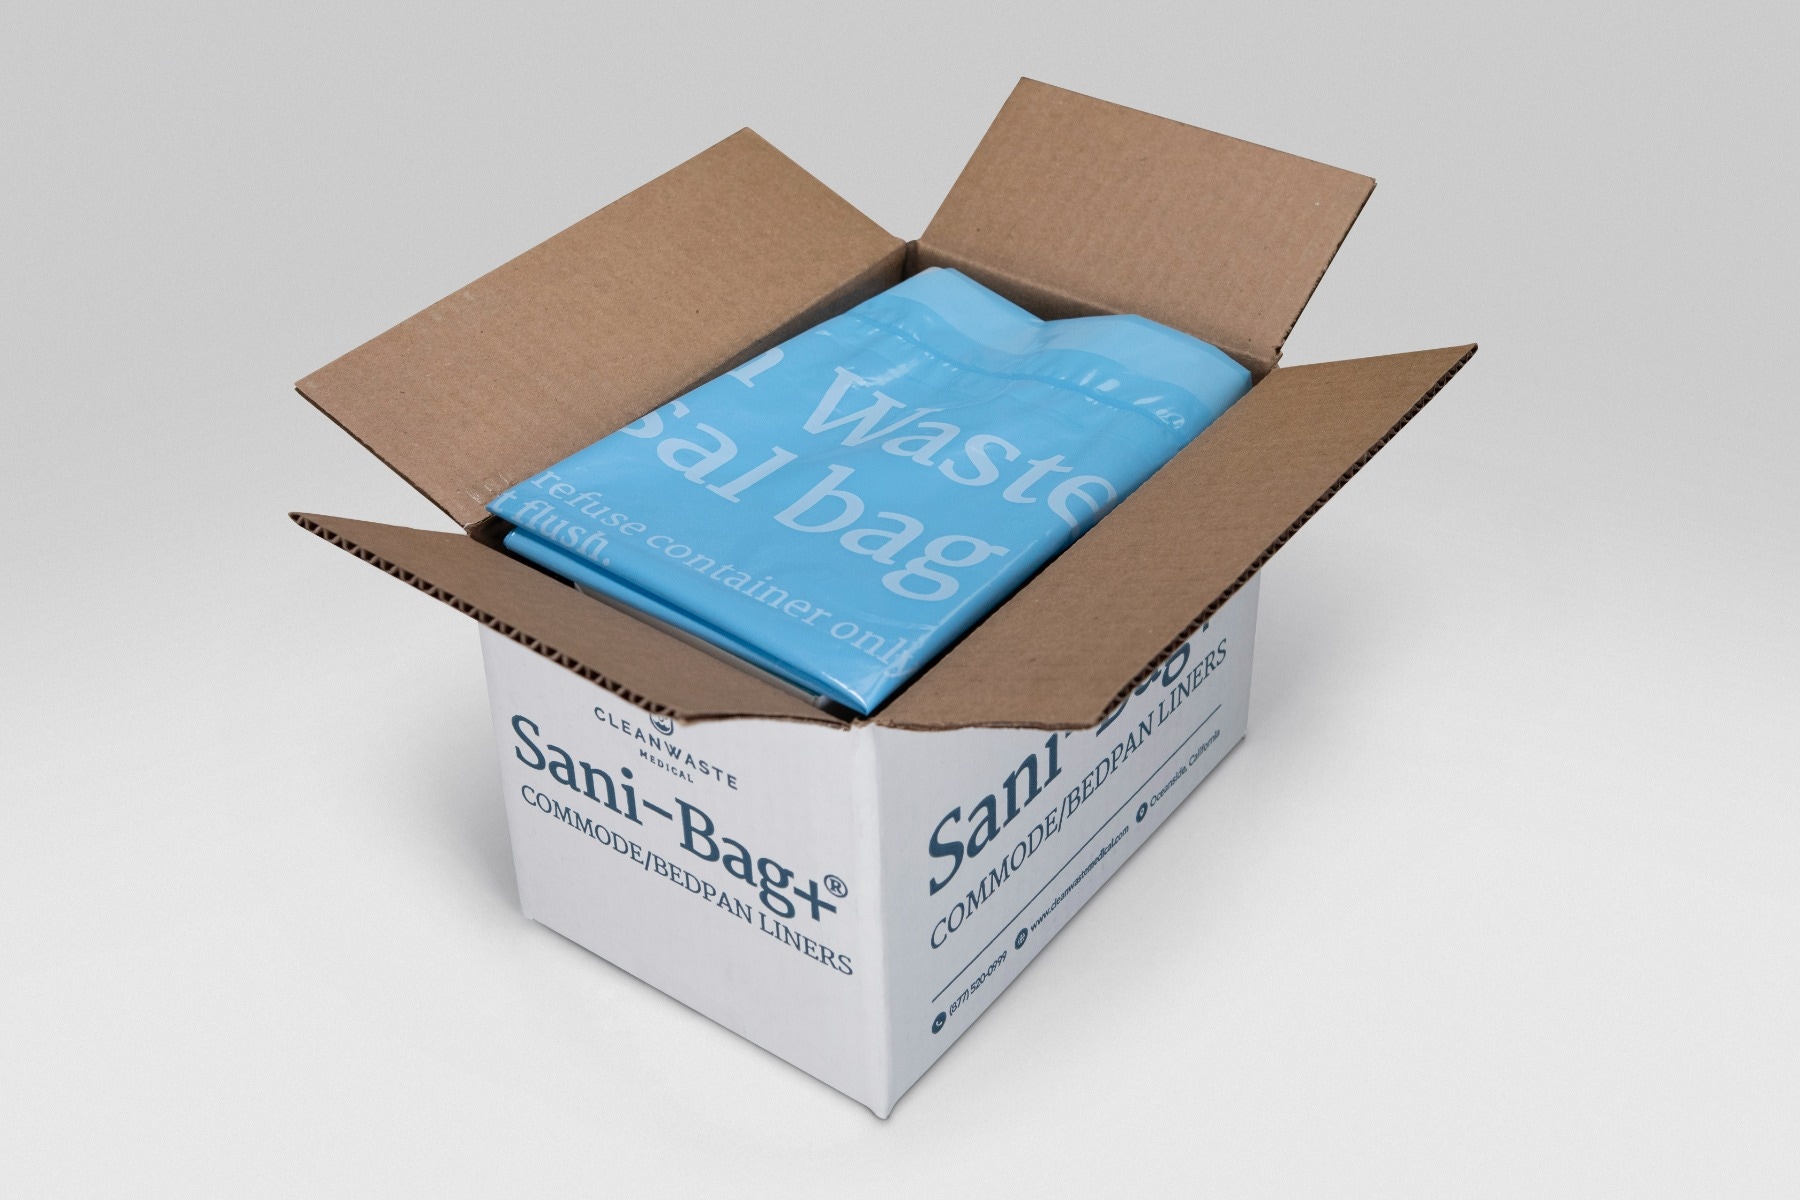 Cleanwaste®Sani-Bag+®Commode Liners
